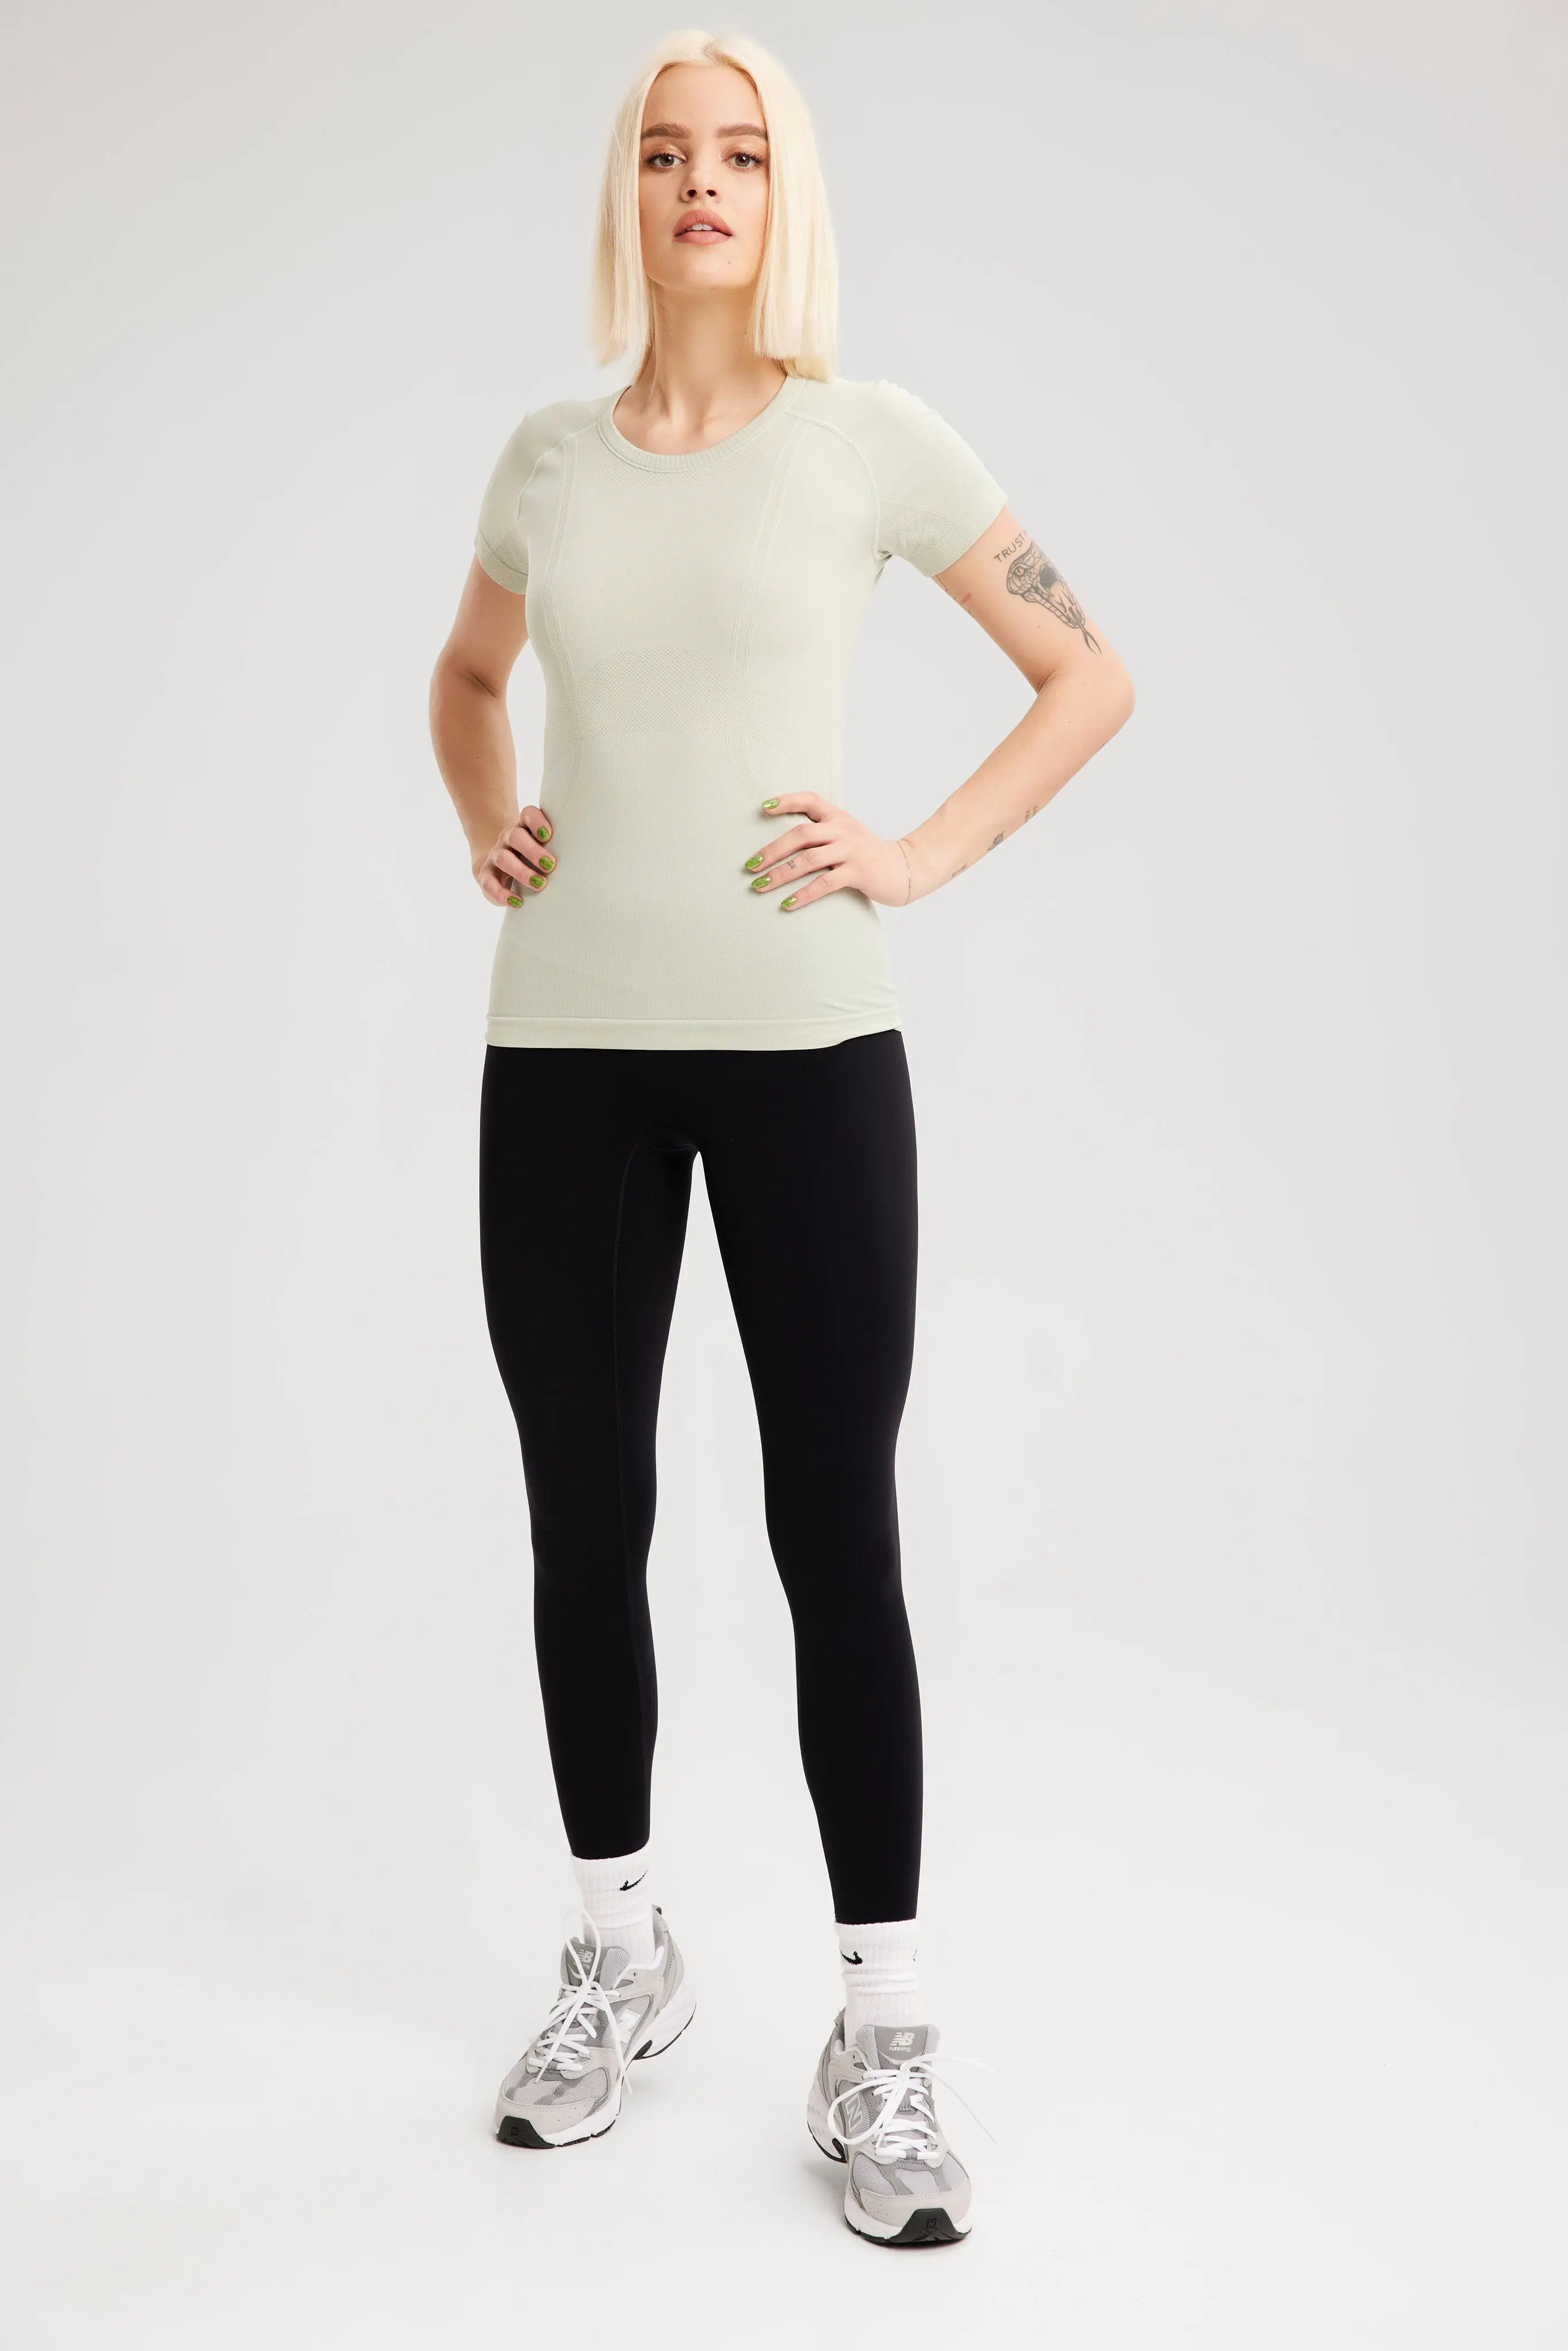 EKJ Women's Active Stretch T-Shirt - Pale Olive My Store